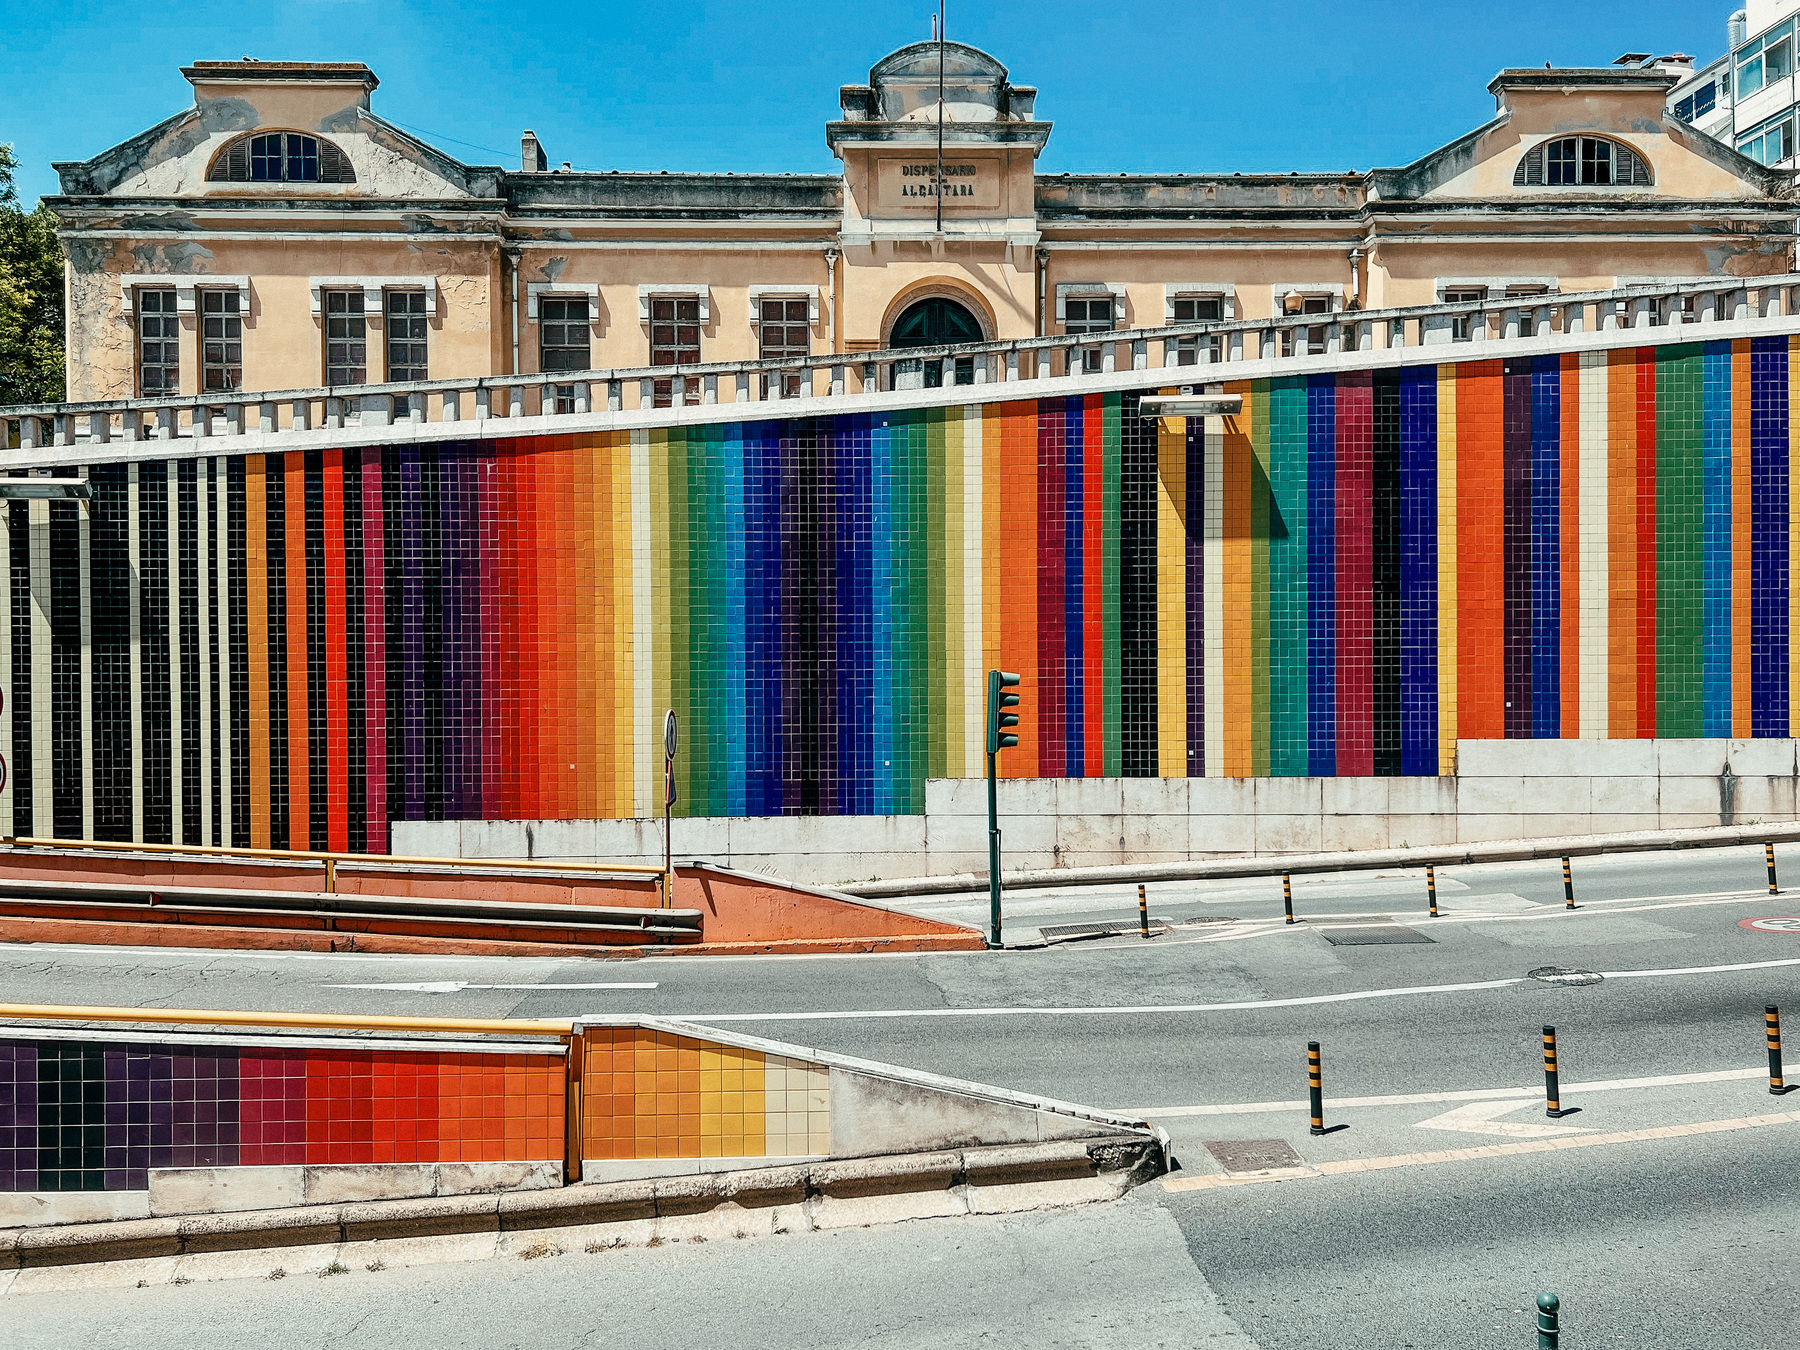 A grandiose building stands behind a very colorful tile wall, overlooking a road, with no cars going by.